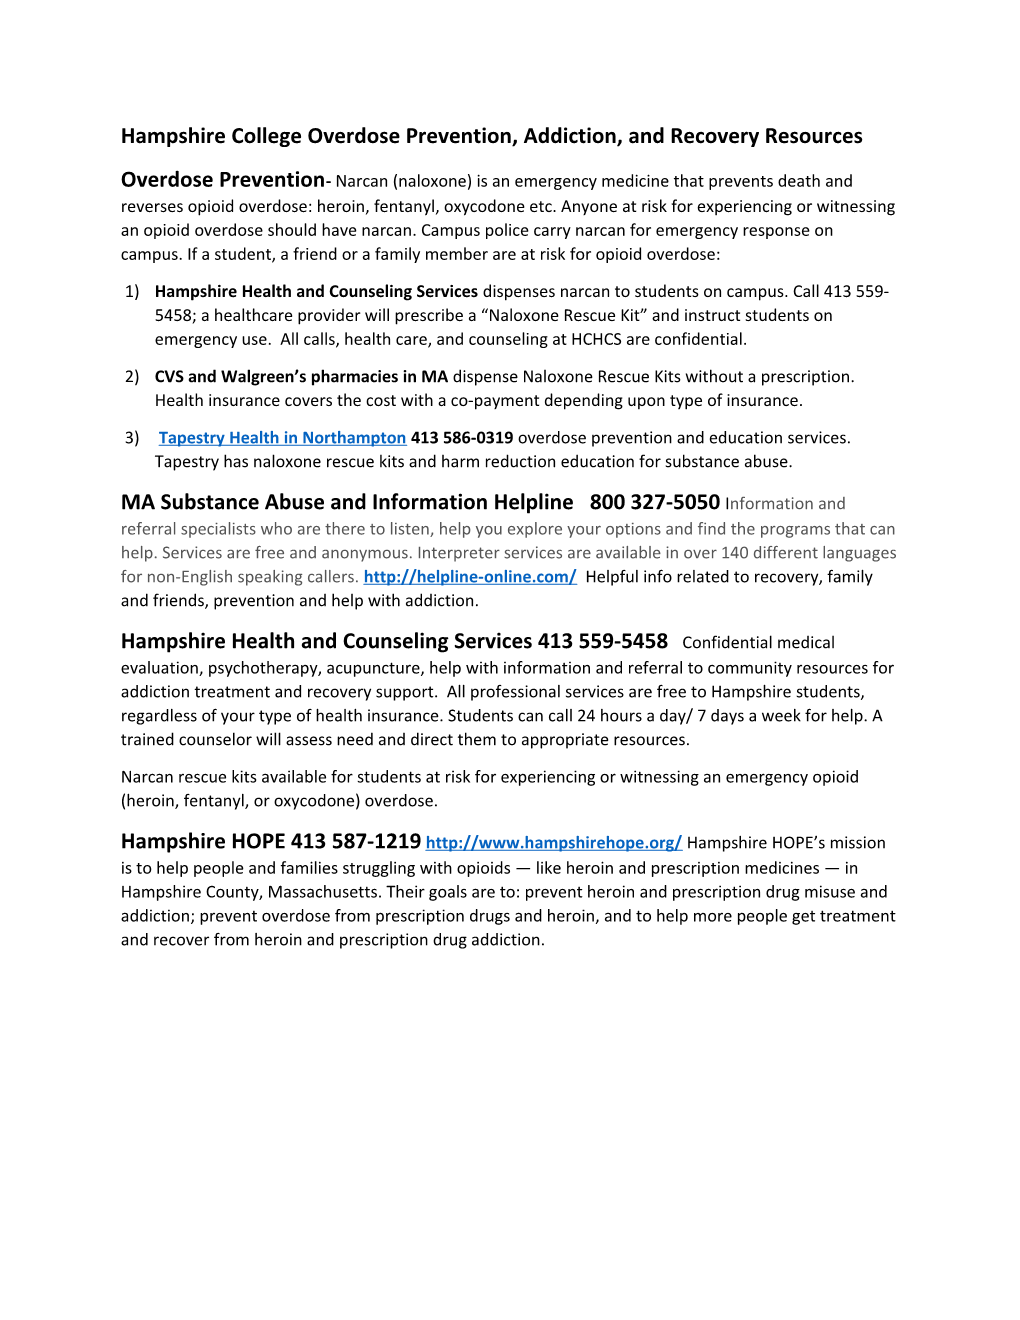 Hampshire College Overdose Prevention, Addiction, and Recovery Resources